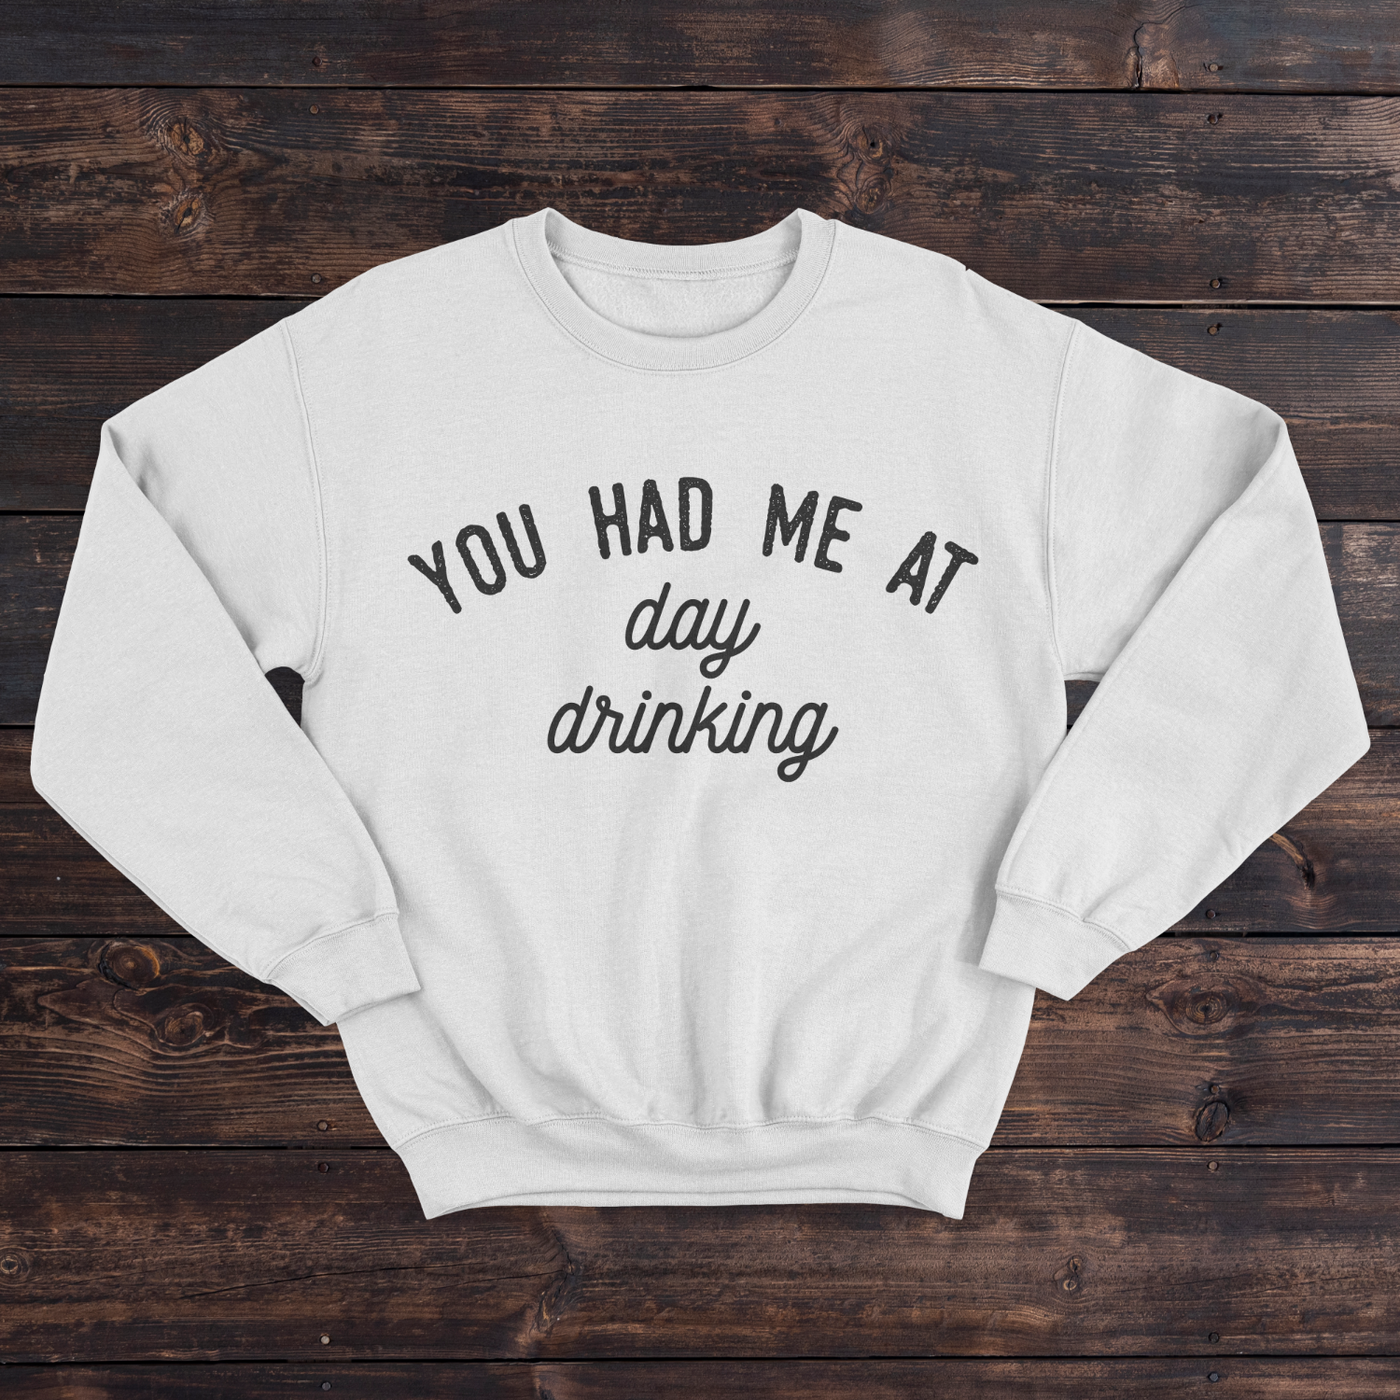 Daydream Tees You Had Me At Day Drinking Sweatshirt White